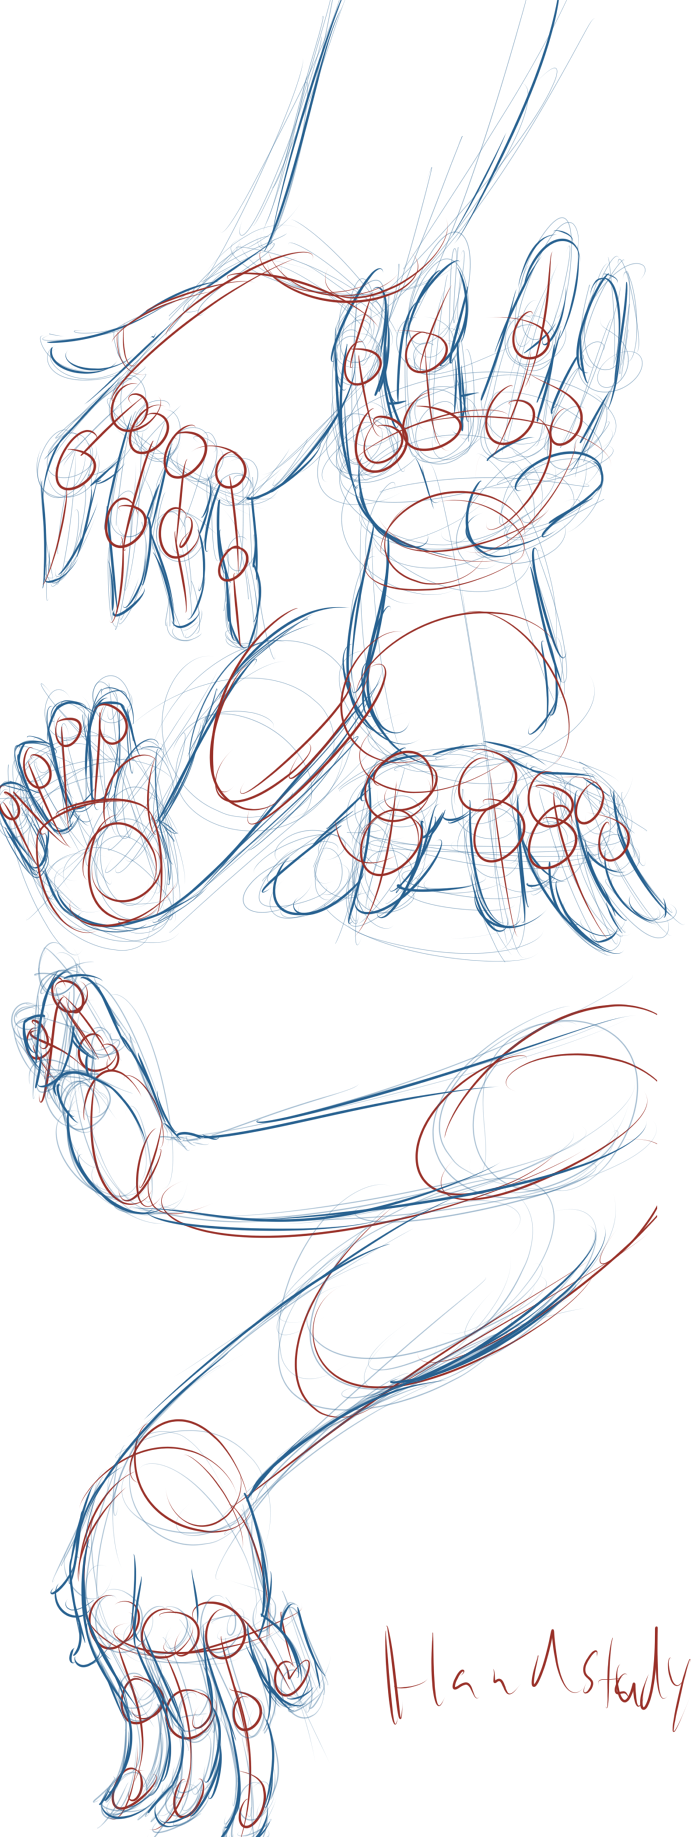 Needed to do a hand study, as i haven&rsquo;t been drawing out a proper hand